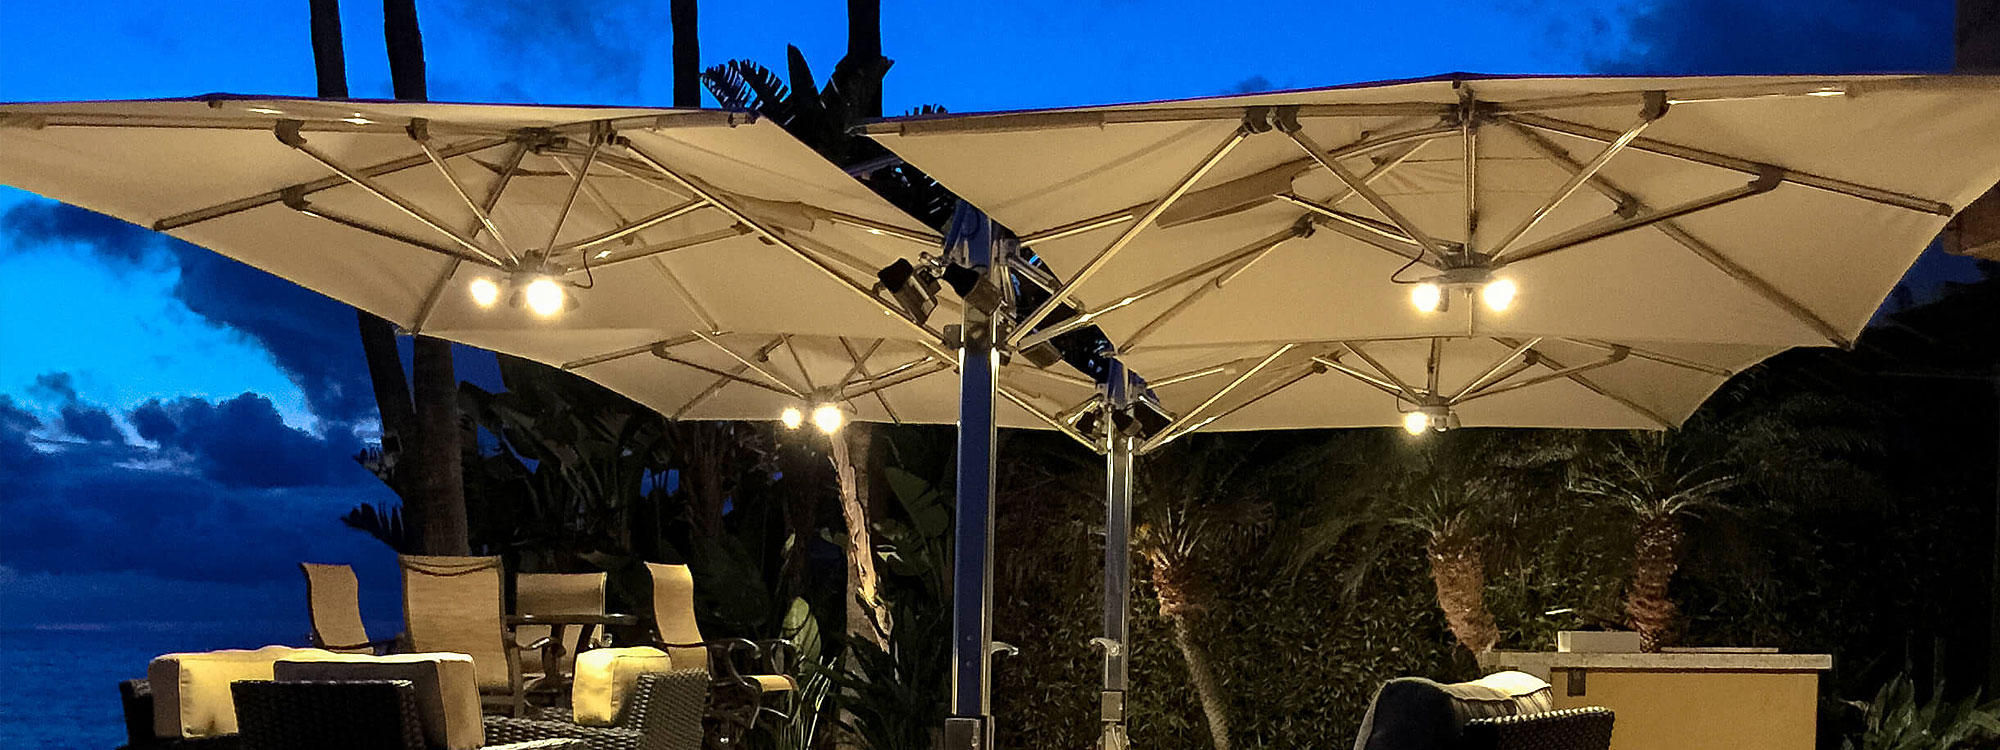 You Can Optionally Fit Infra-Red Heating & Lighting To Tuuci Ocean Master Max Cantilever Parasols. Modern Cantilever Parasols In Marine Grade Parasol Materials. Residential, Hospitality And Hotel Parasols.